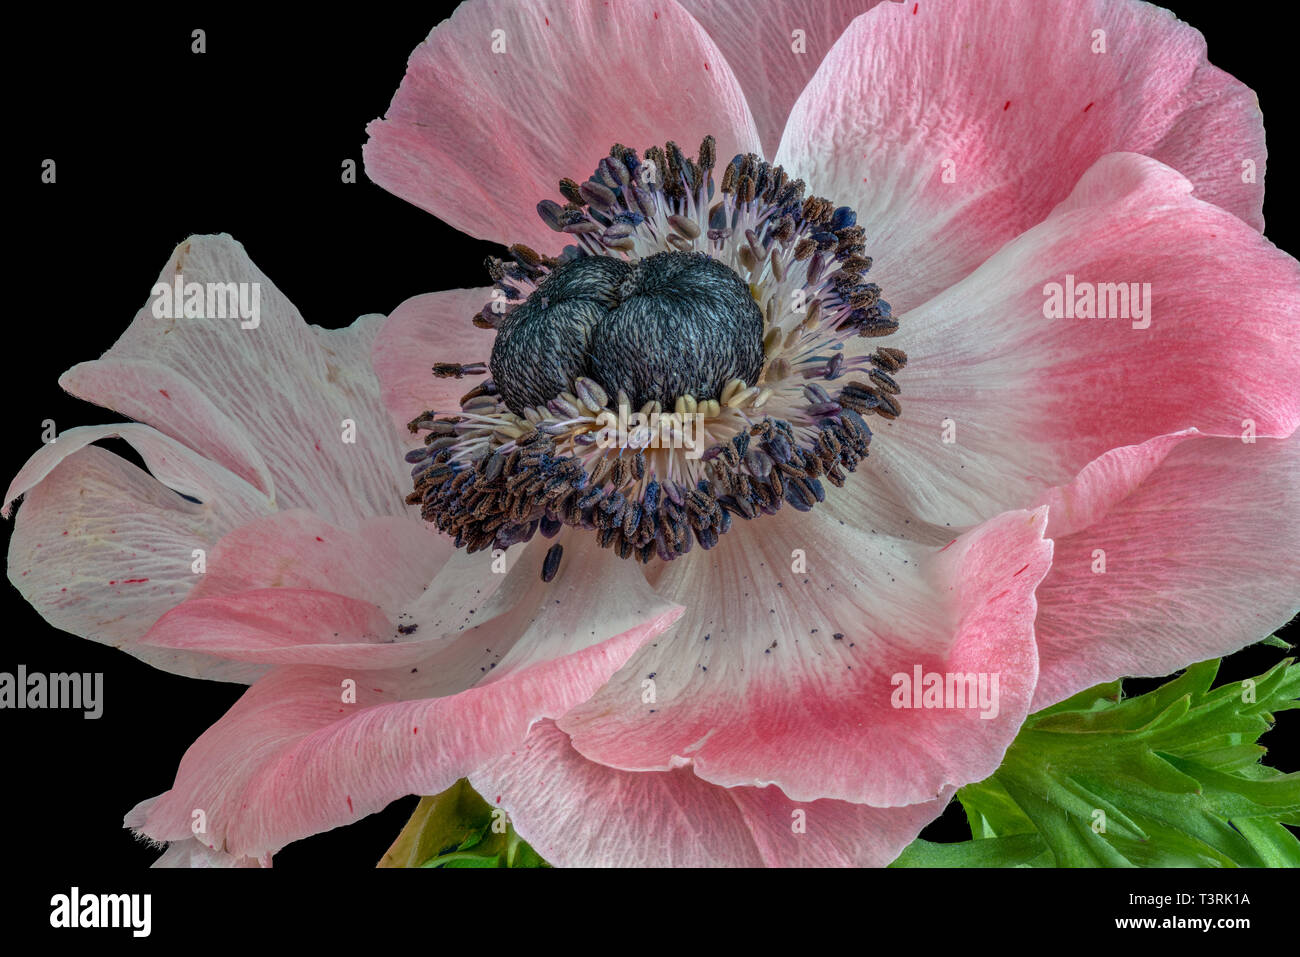 Fine art still life floral macro of a single isolated wide open bright white pink blue anemone blossom with green leaves, detailed texture on black ba Stock Photo